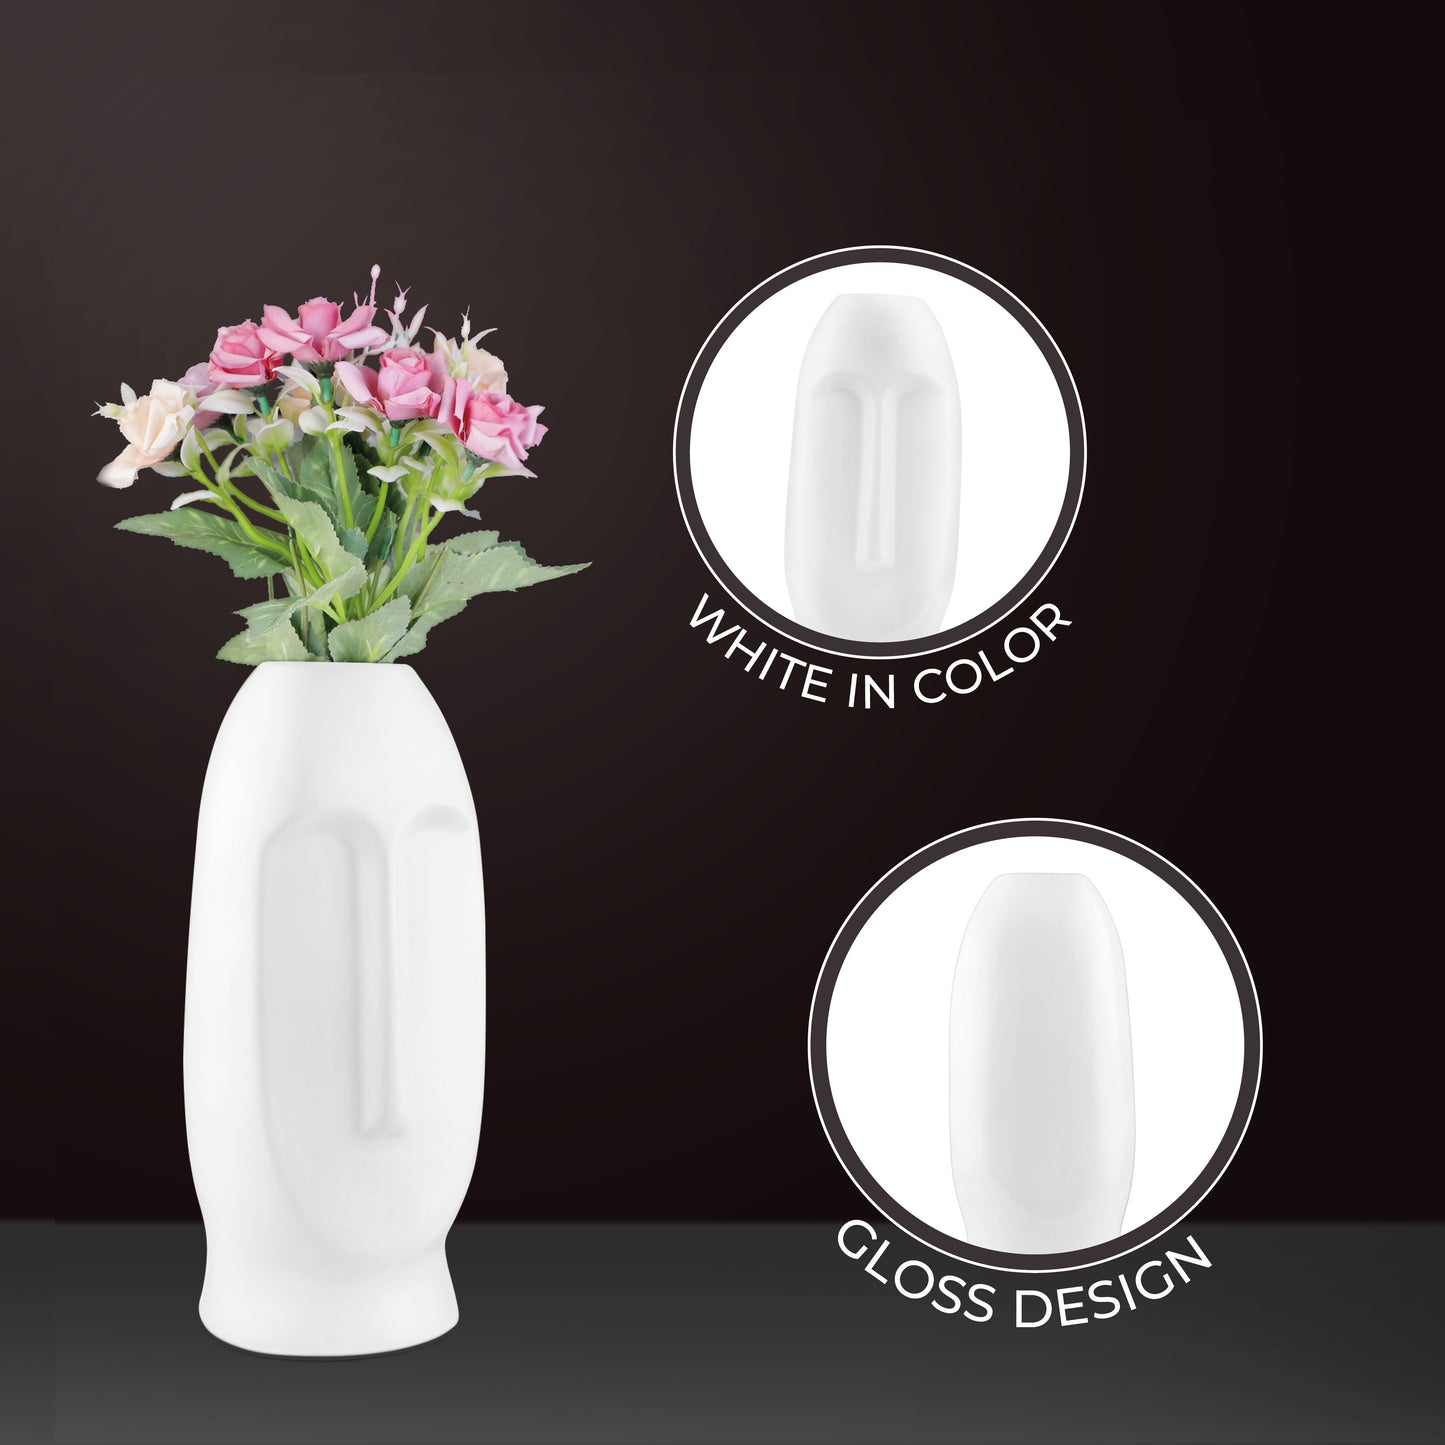 LuxeLane 'Face Vase' for Home Decor - White Gloss, 9 inches, Pack of 1